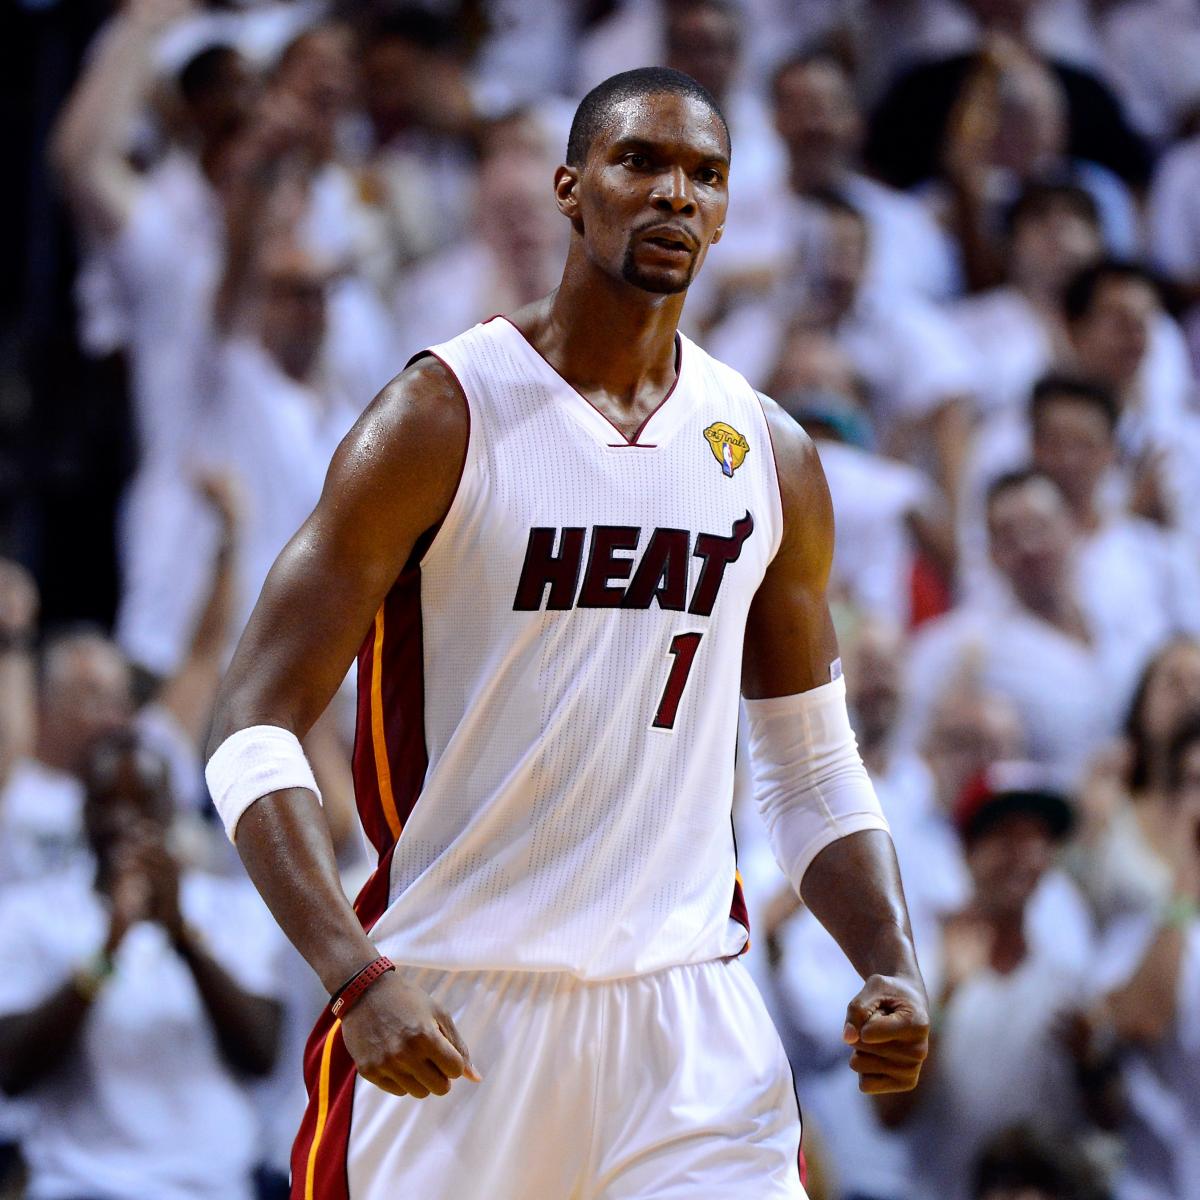 Chris Bosh's battle with Heat requires dose of perspective, in